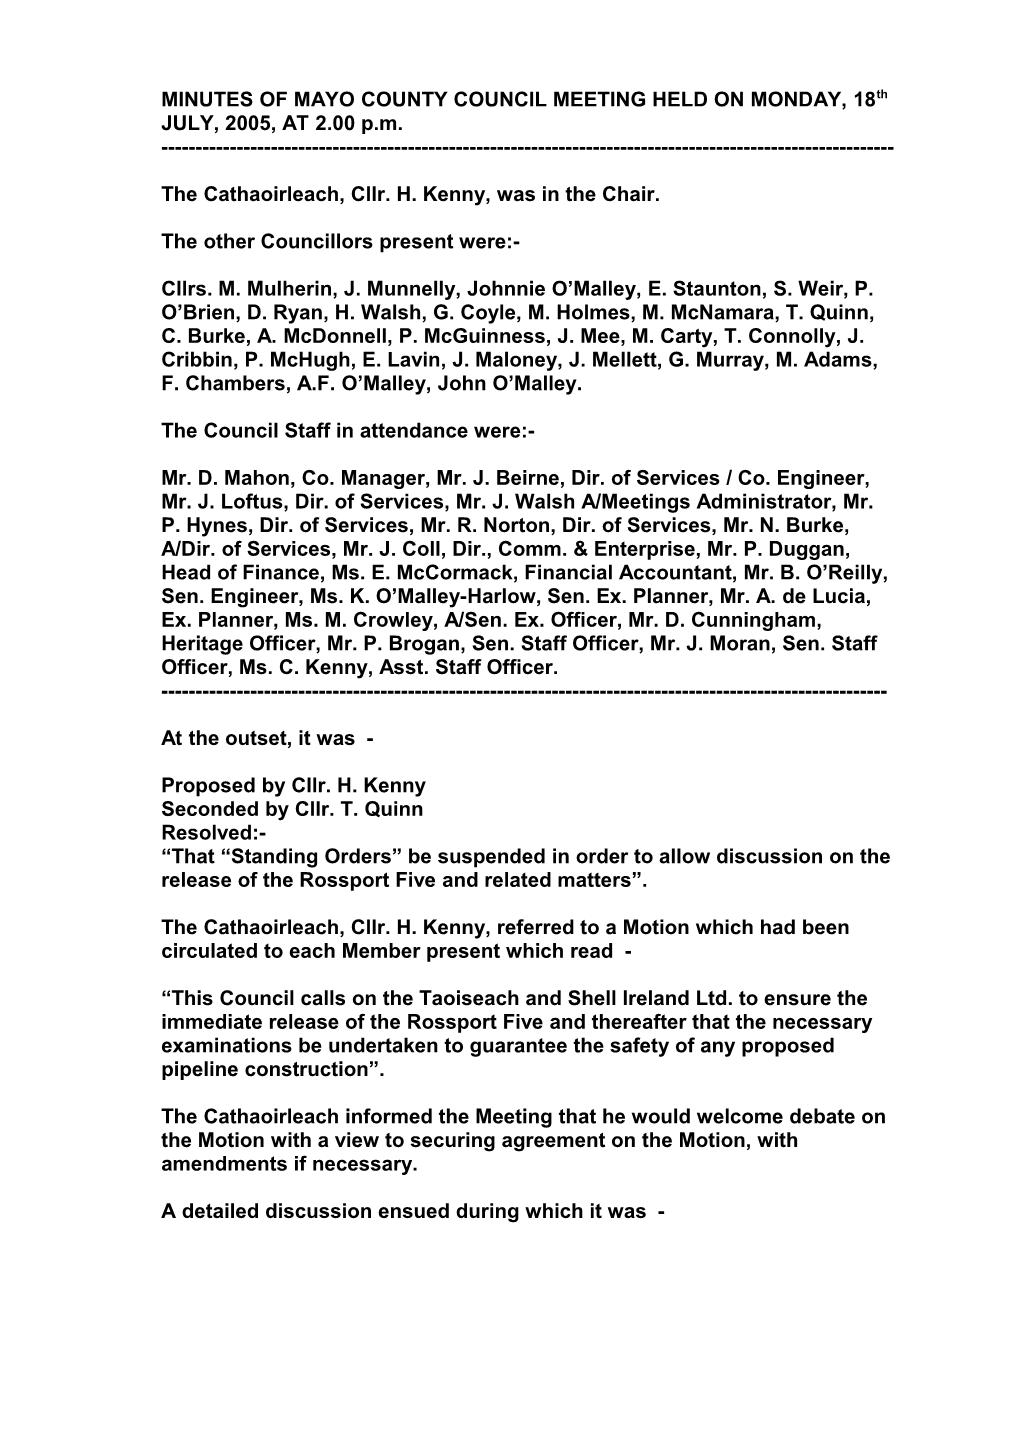 MINUTES of MAYO COUNTY COUNCIL MEETING HELD on MONDAY, 18Th JULY, 2005, at 2